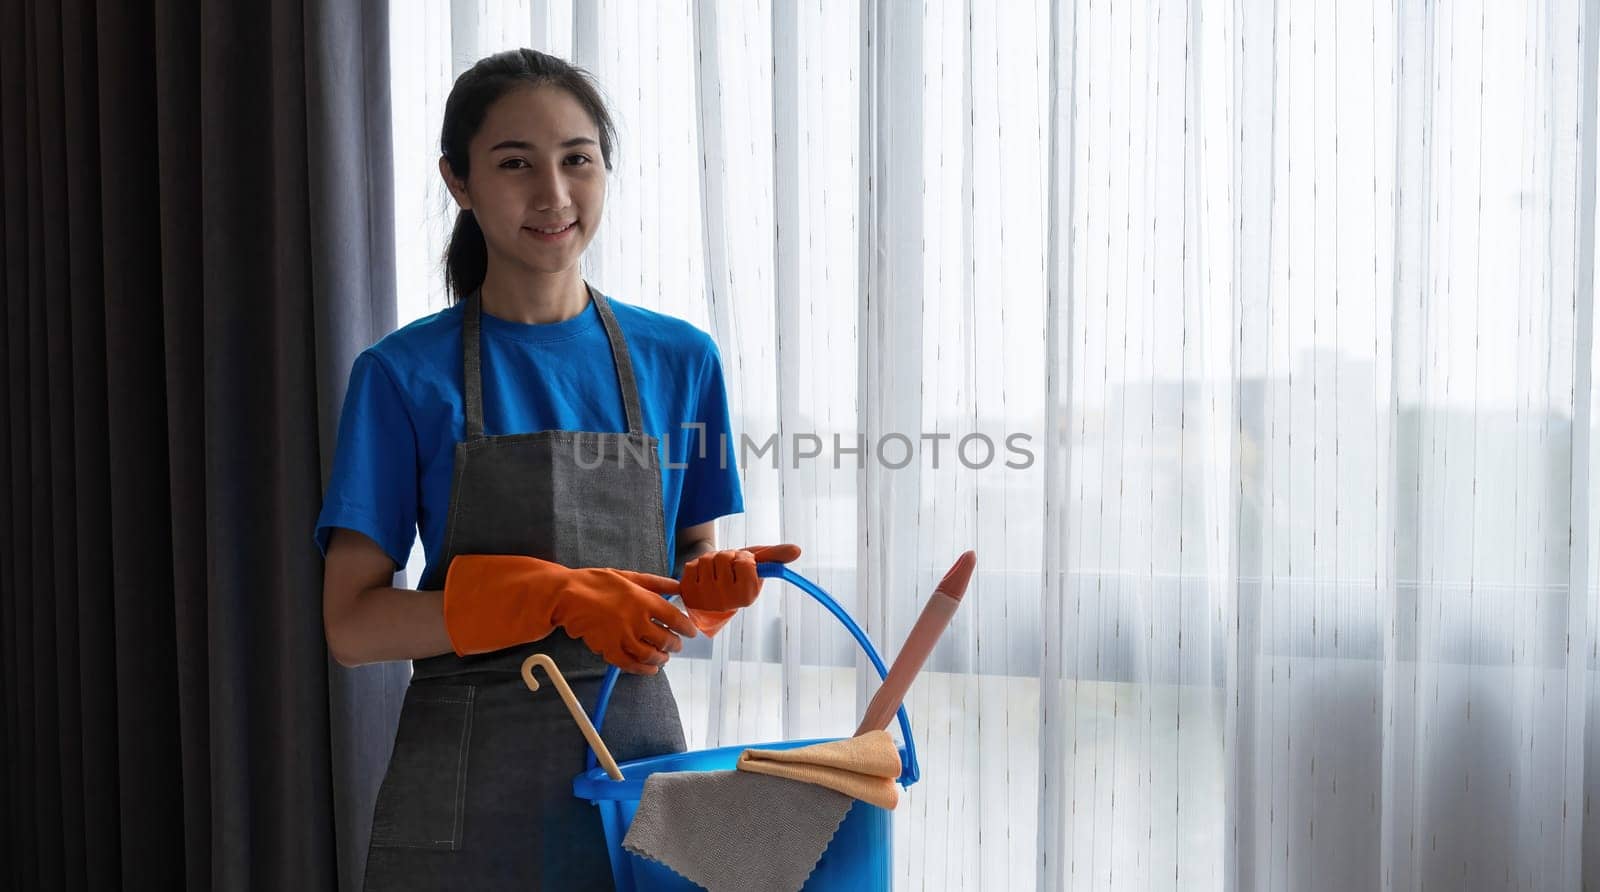 A young female cleaning lady stands holding cleaning tools and prepares to clean the floor..